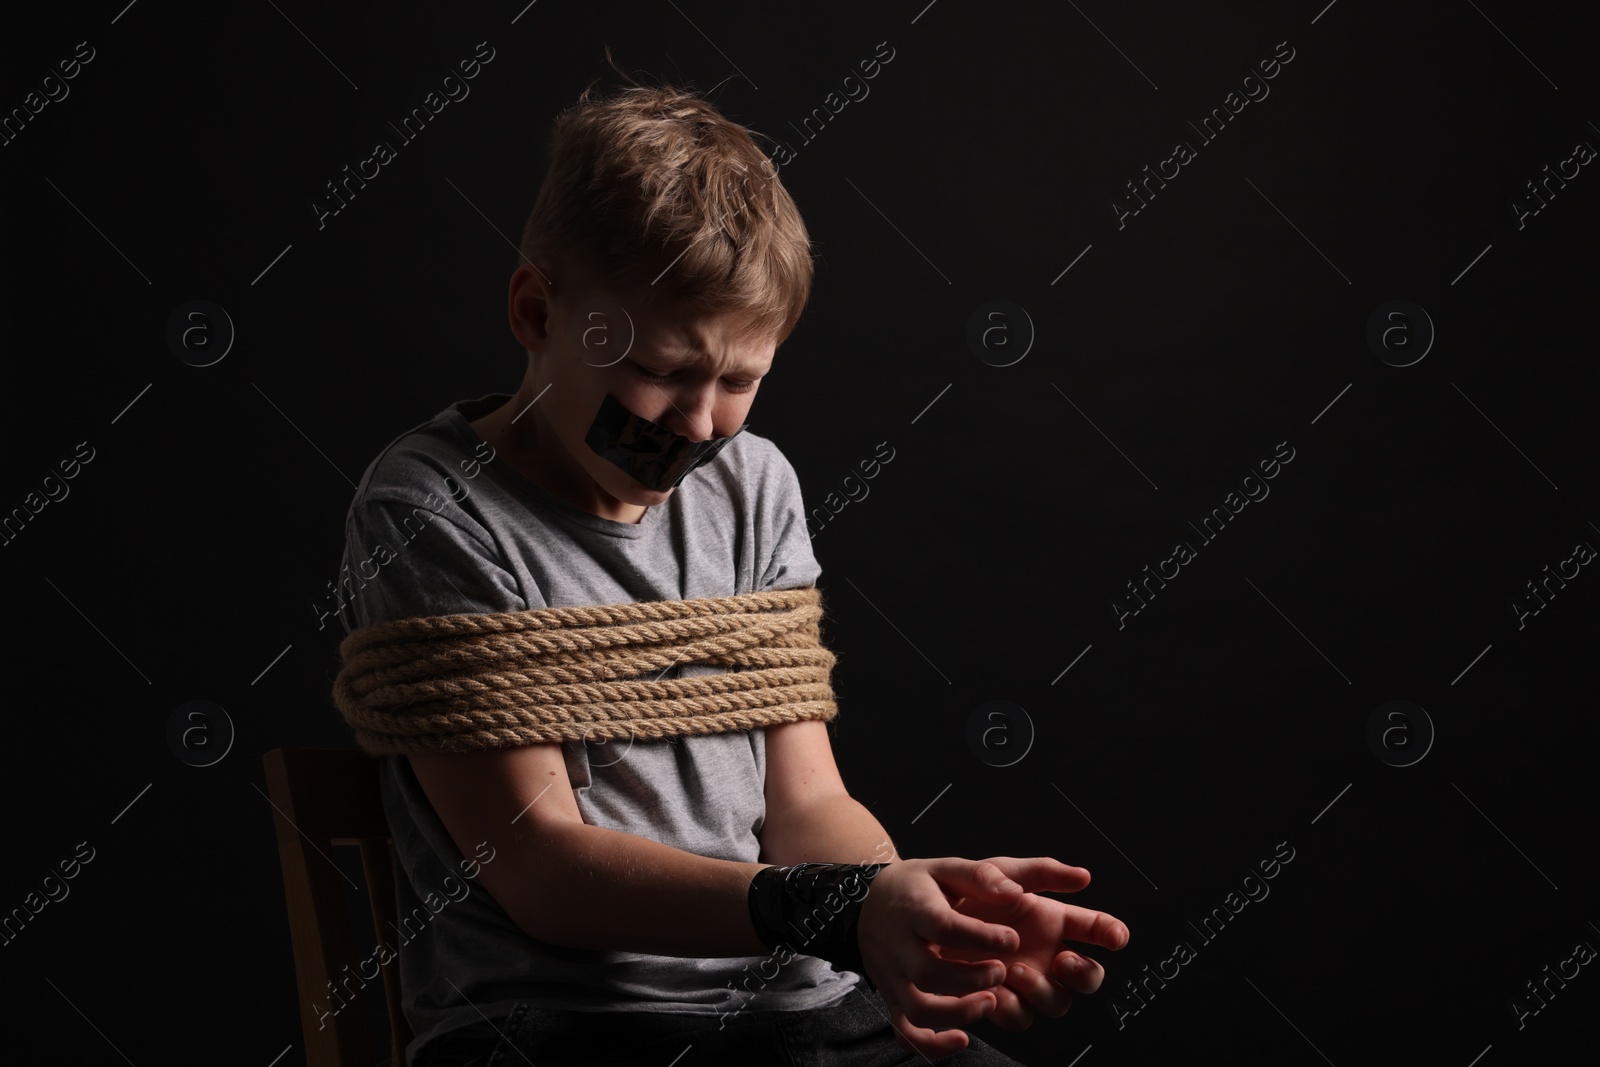 Photo of Little boy with taped mouth tied up and taken hostage against dark background. Space for text